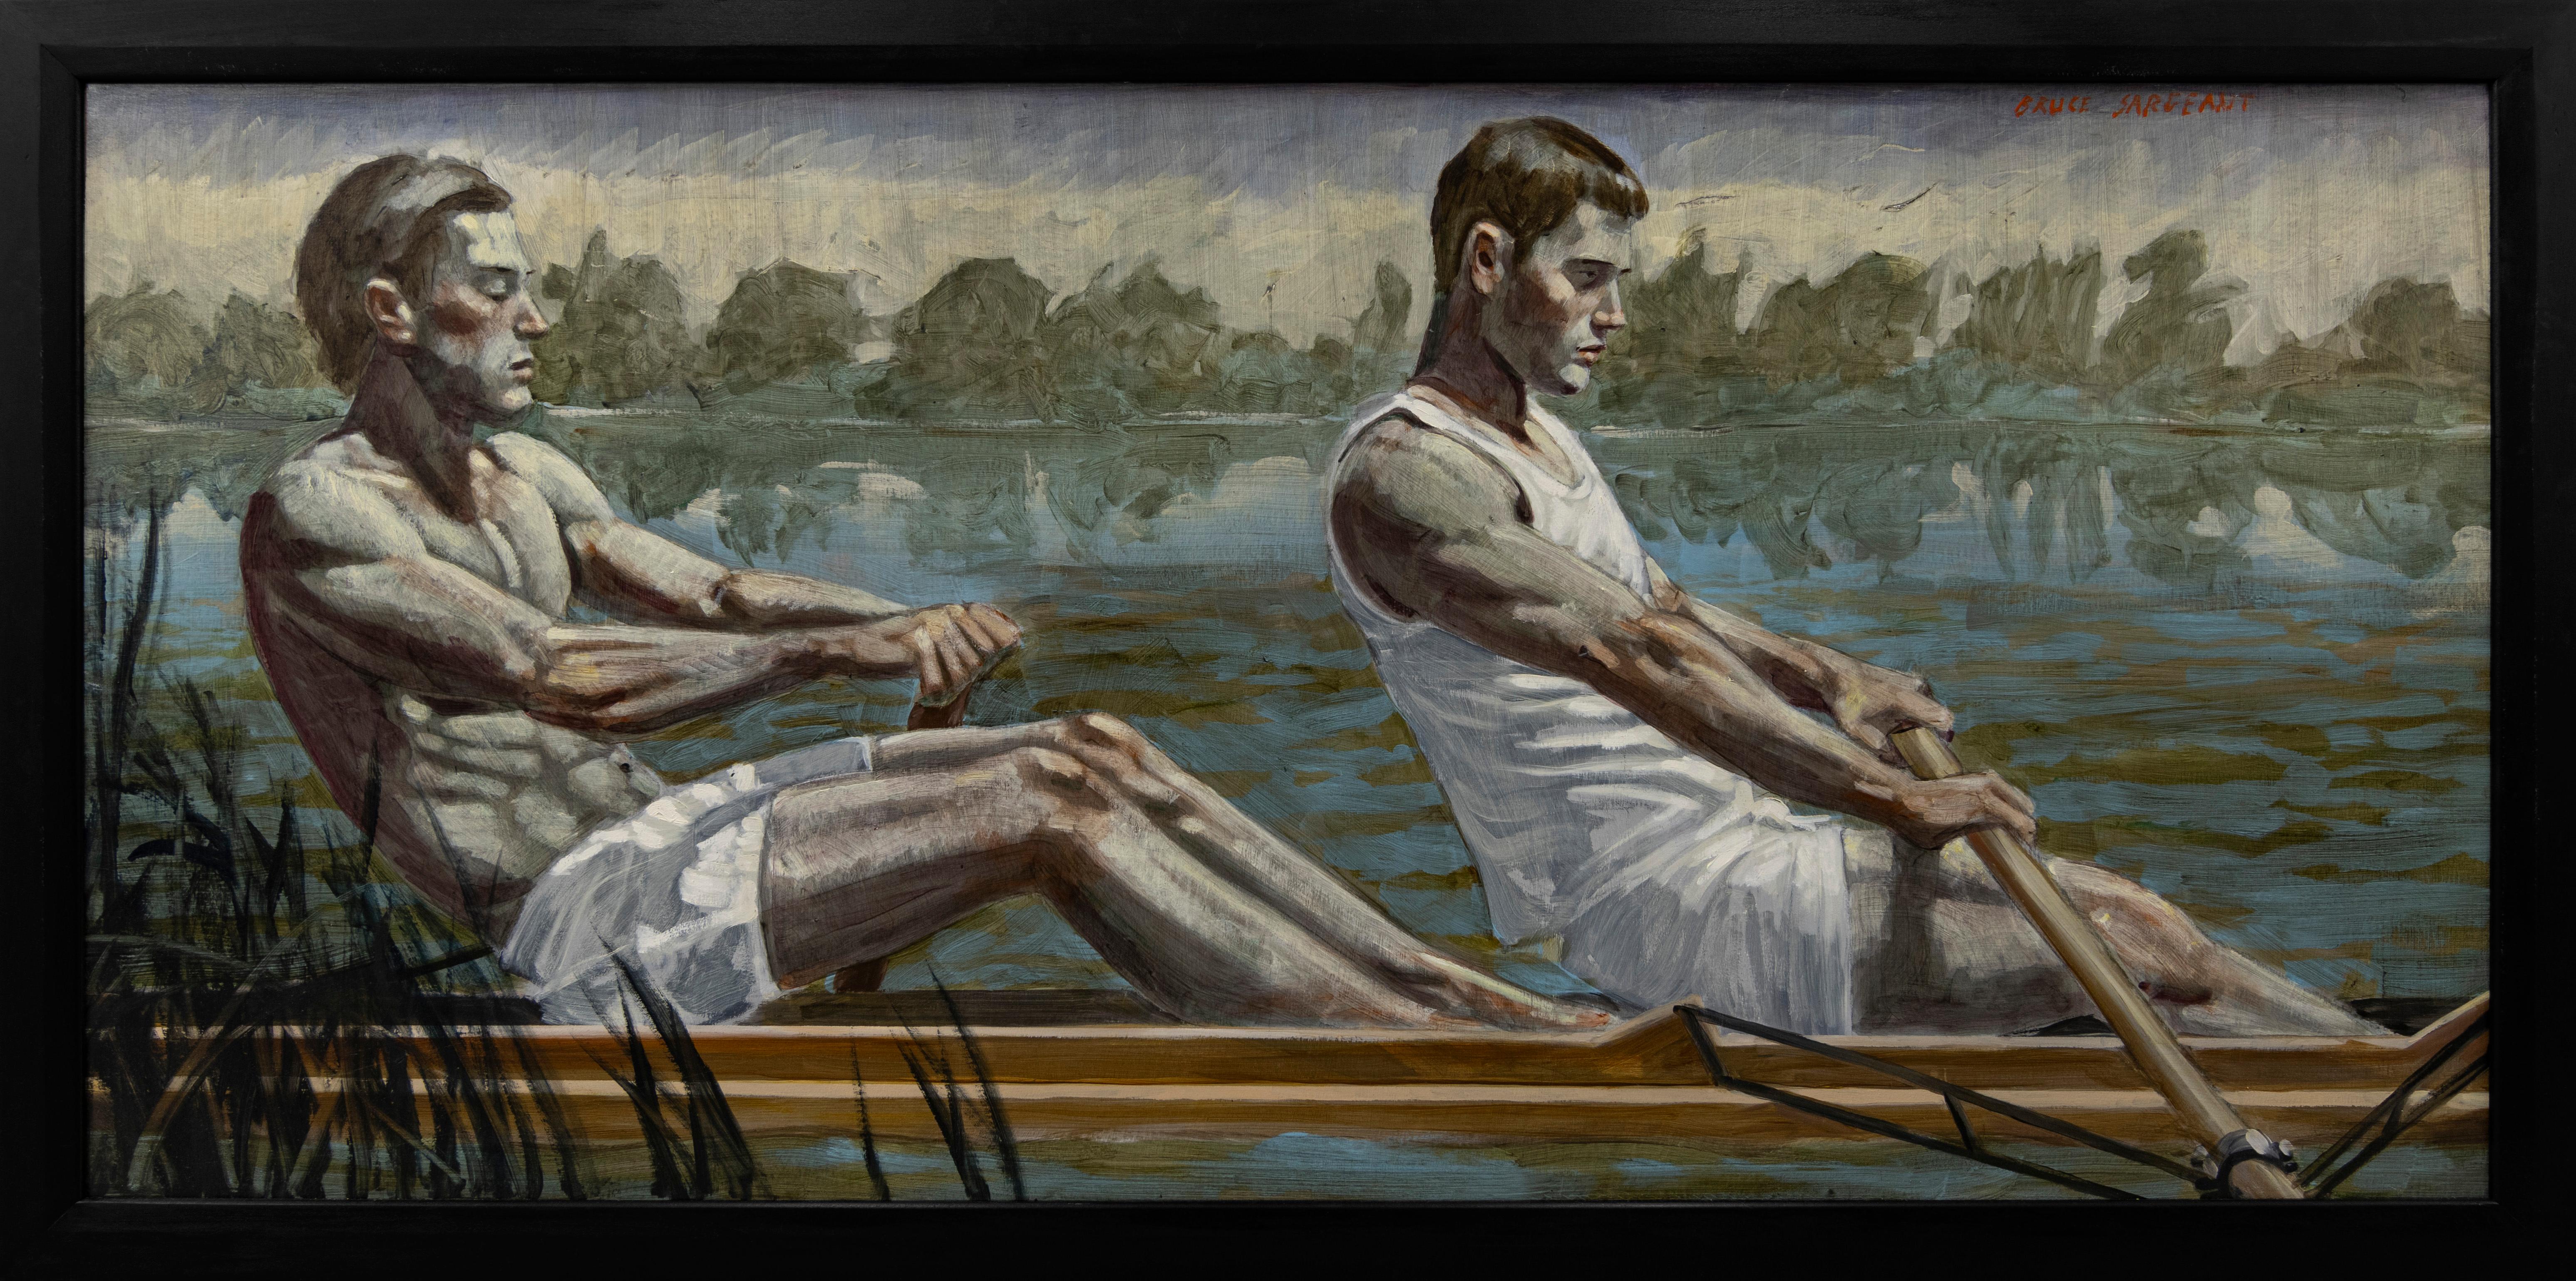 [Bruce Sargeant (1898-1938)] Two Rowers, Early Morning Practice - Painting by Mark Beard